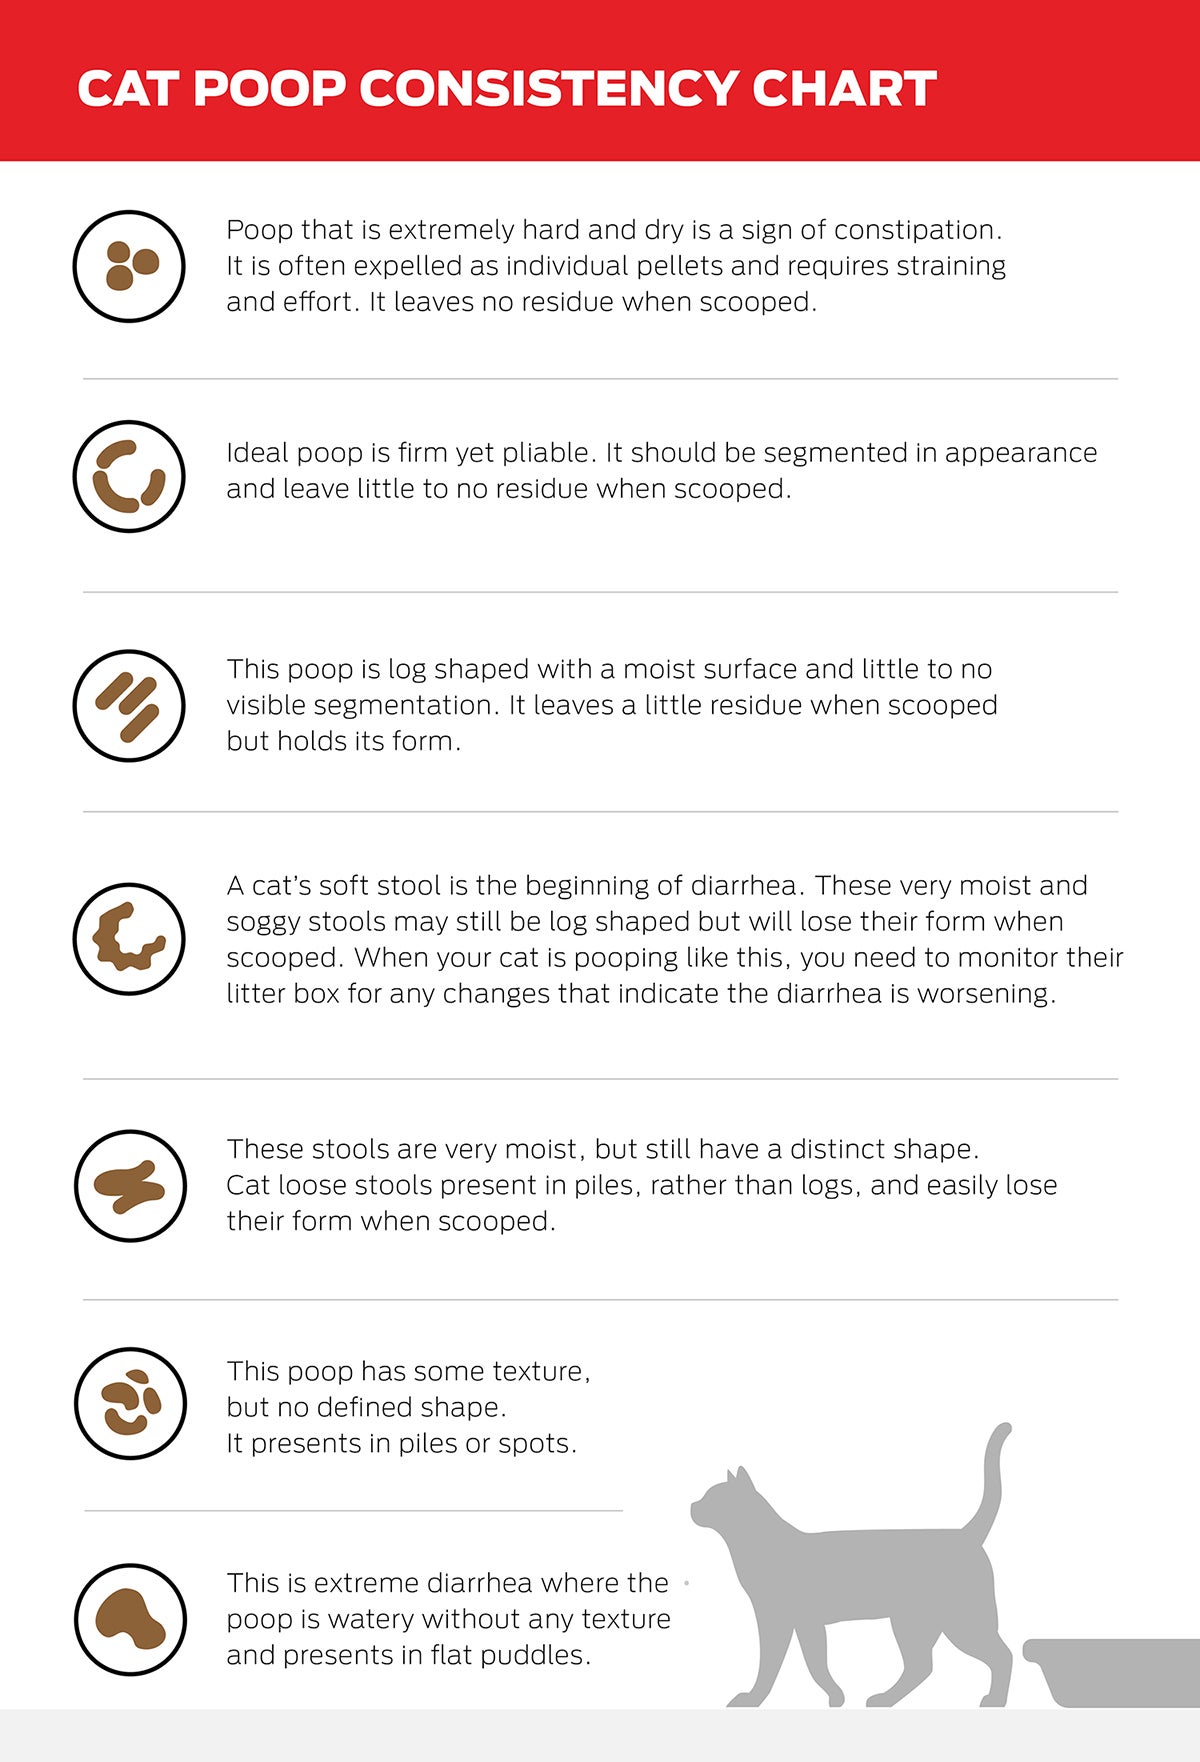 cat poop consistency chart infographic